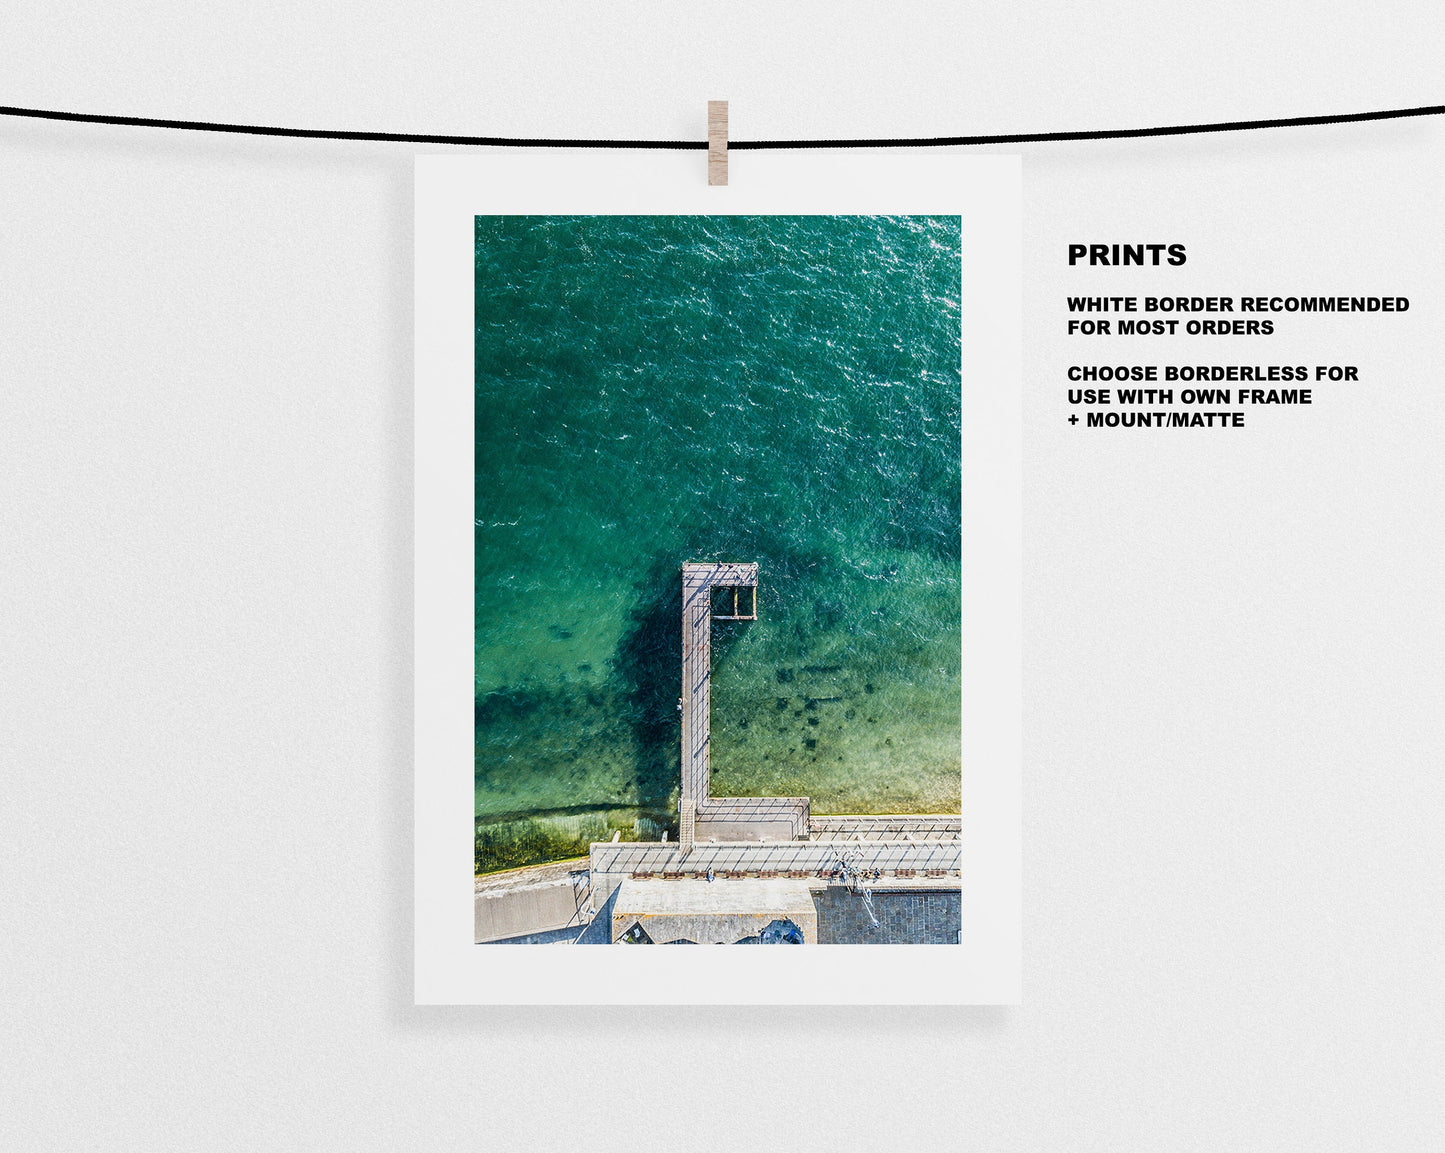 Hotwalls Pier - Photography Print - Portsmouth and Southsea Prints - Wall Art -  Frame and Canvas Options - Portrait - Aerial